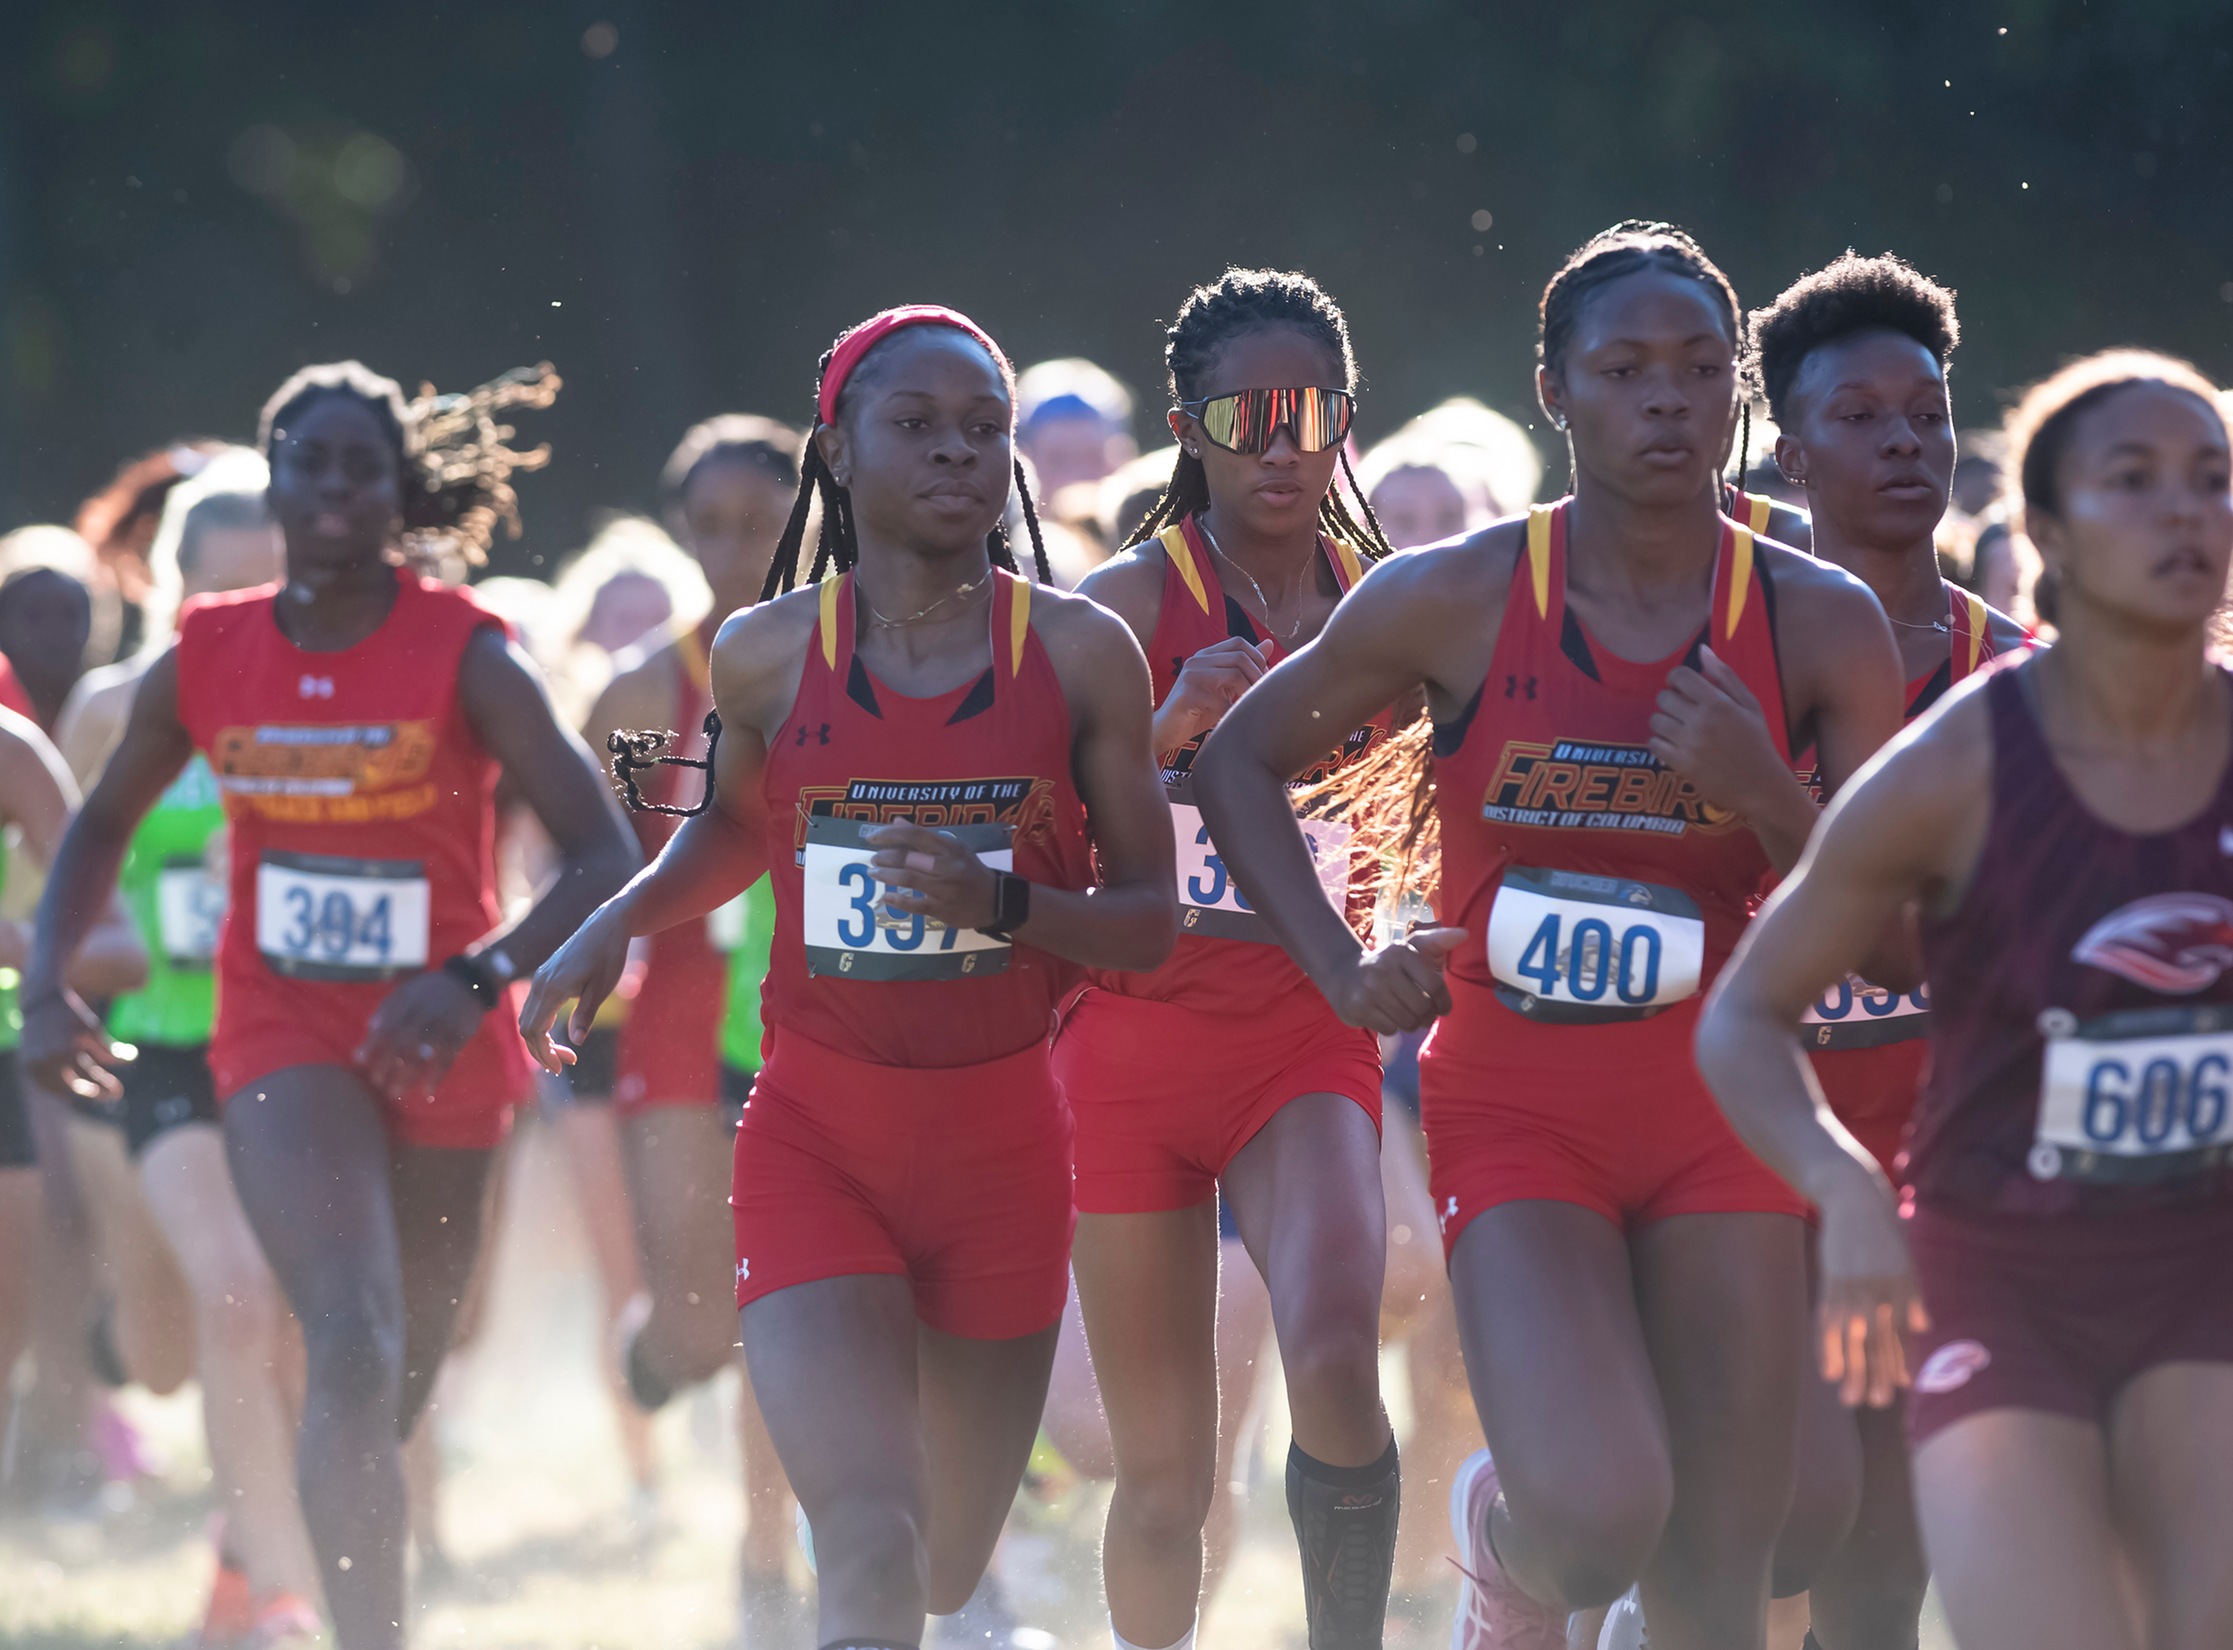 Firebirds Compete in First 6k of the Season at Salisbury University